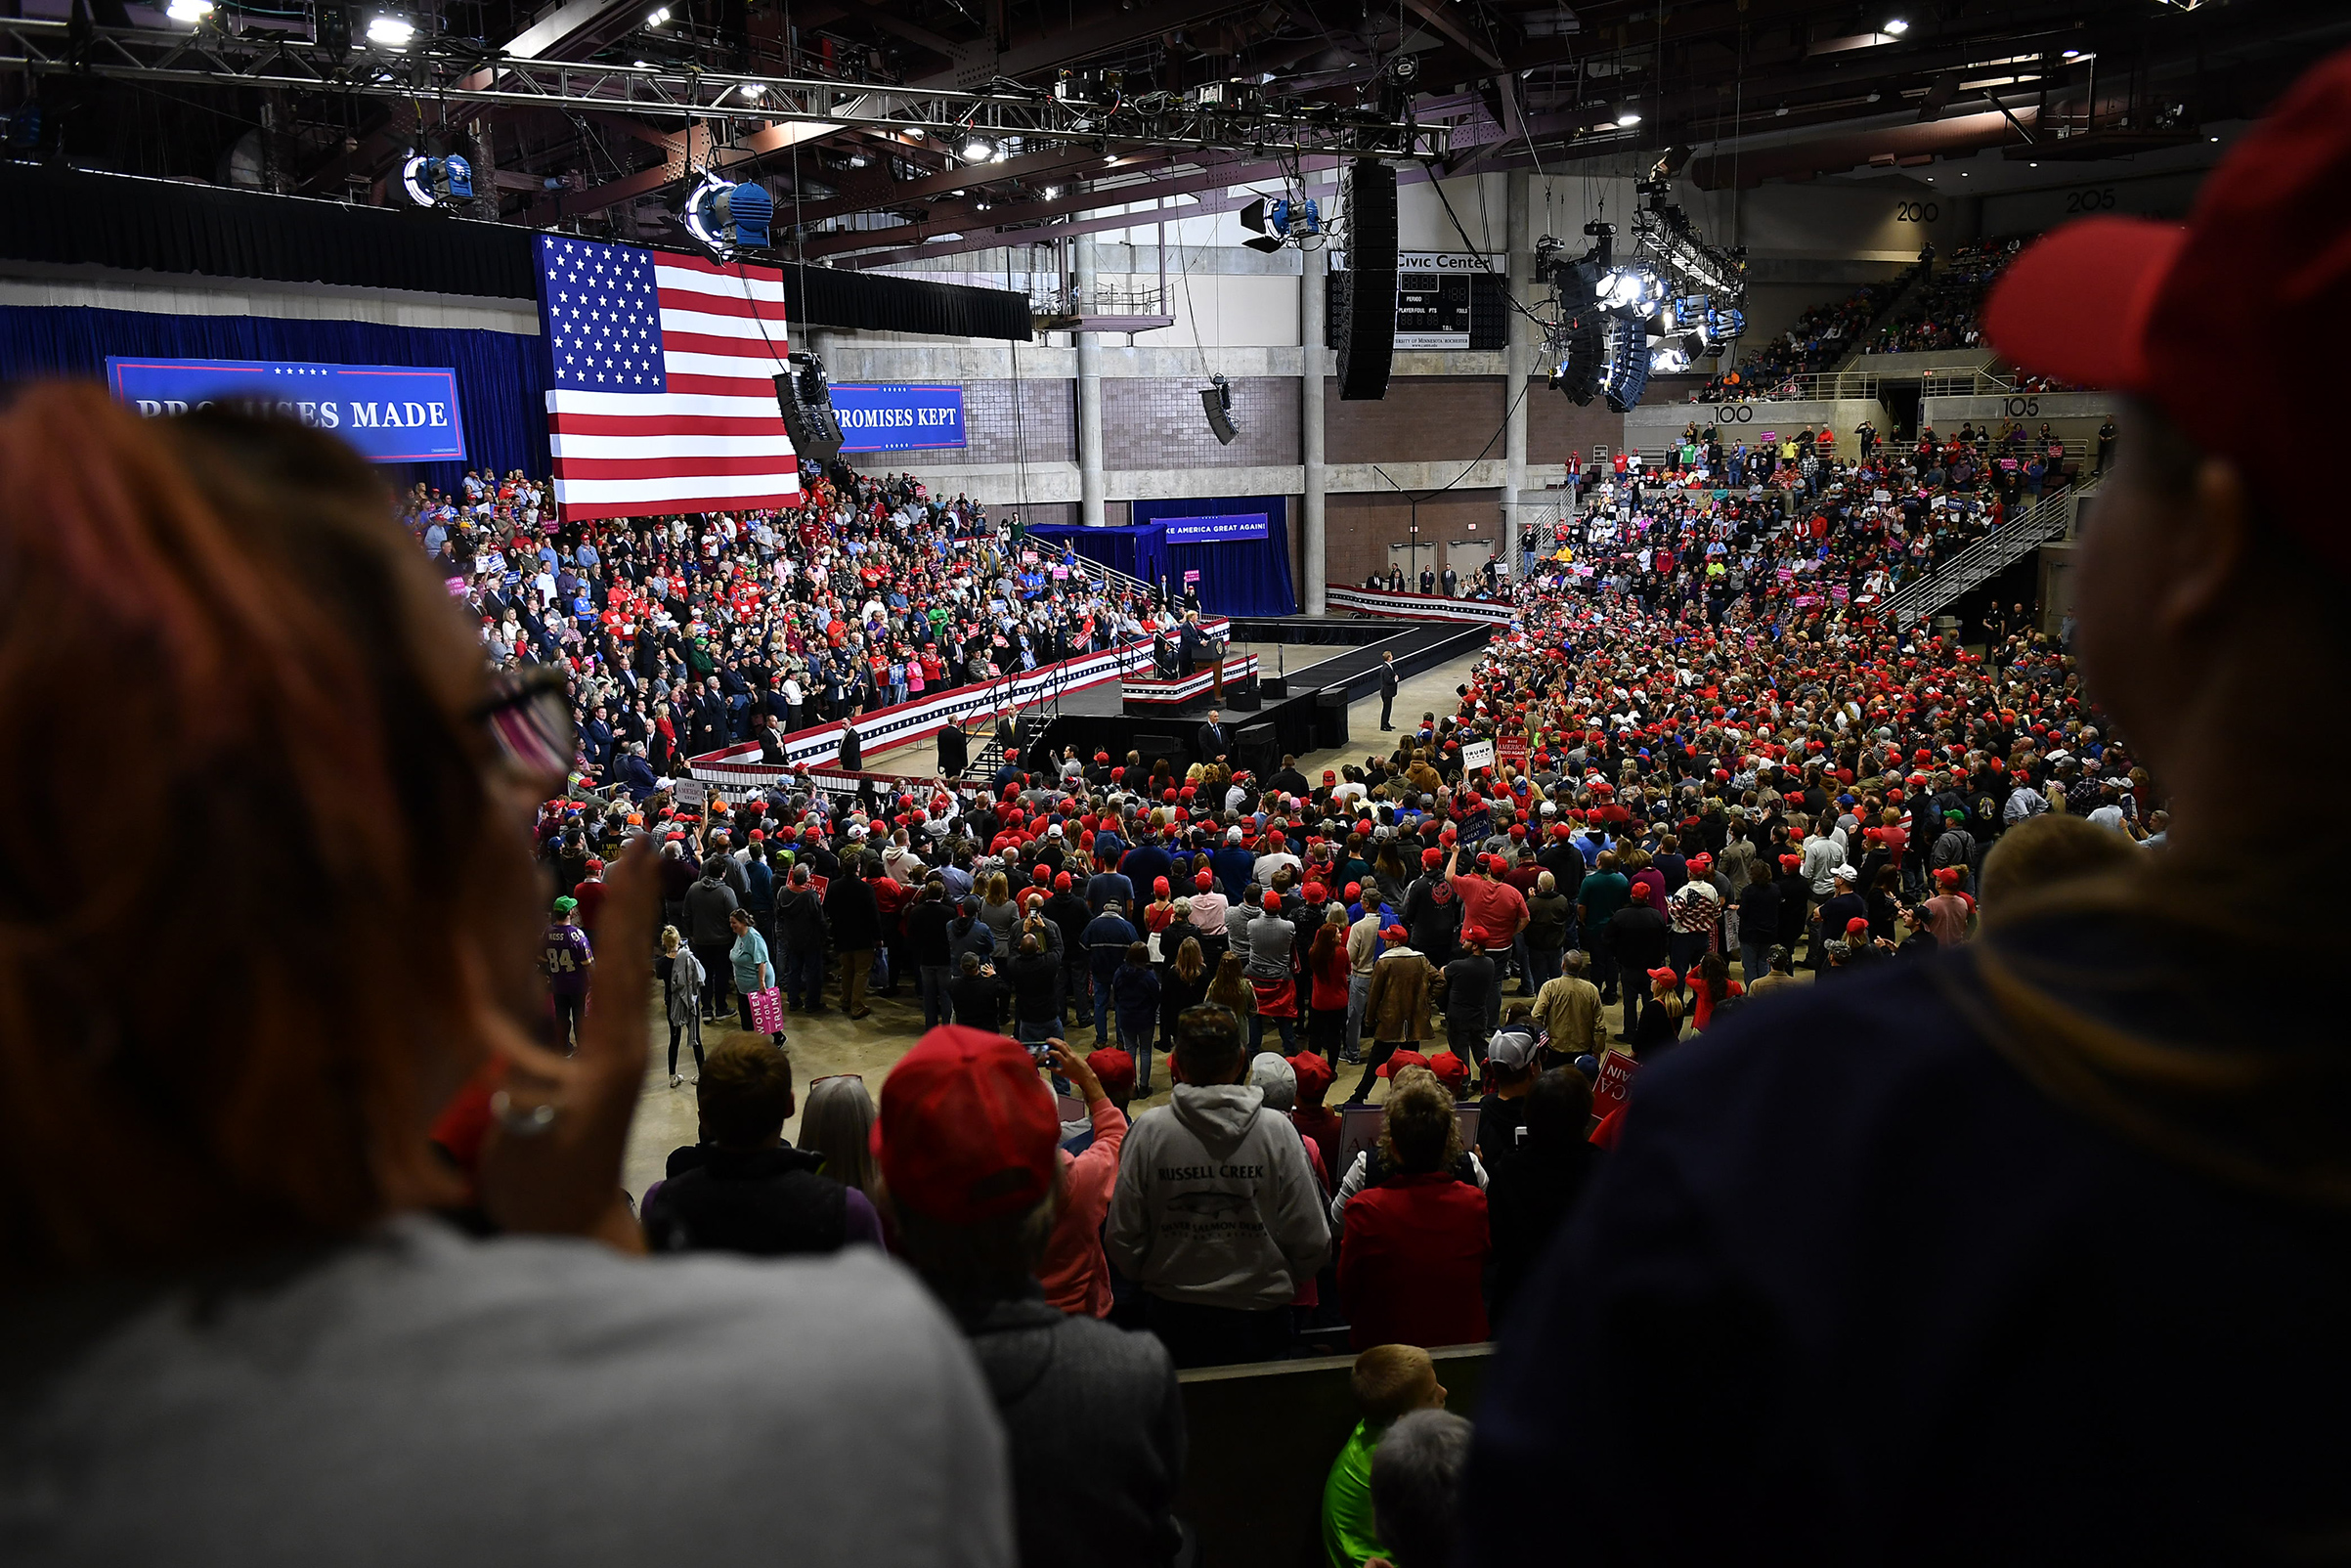 President Donald Trump speaks at a rally in the Mayo Civic Center in Rochester, Minn. on Oct. 4, 2018. (Mandel Ngan—AFP/Getty Images)